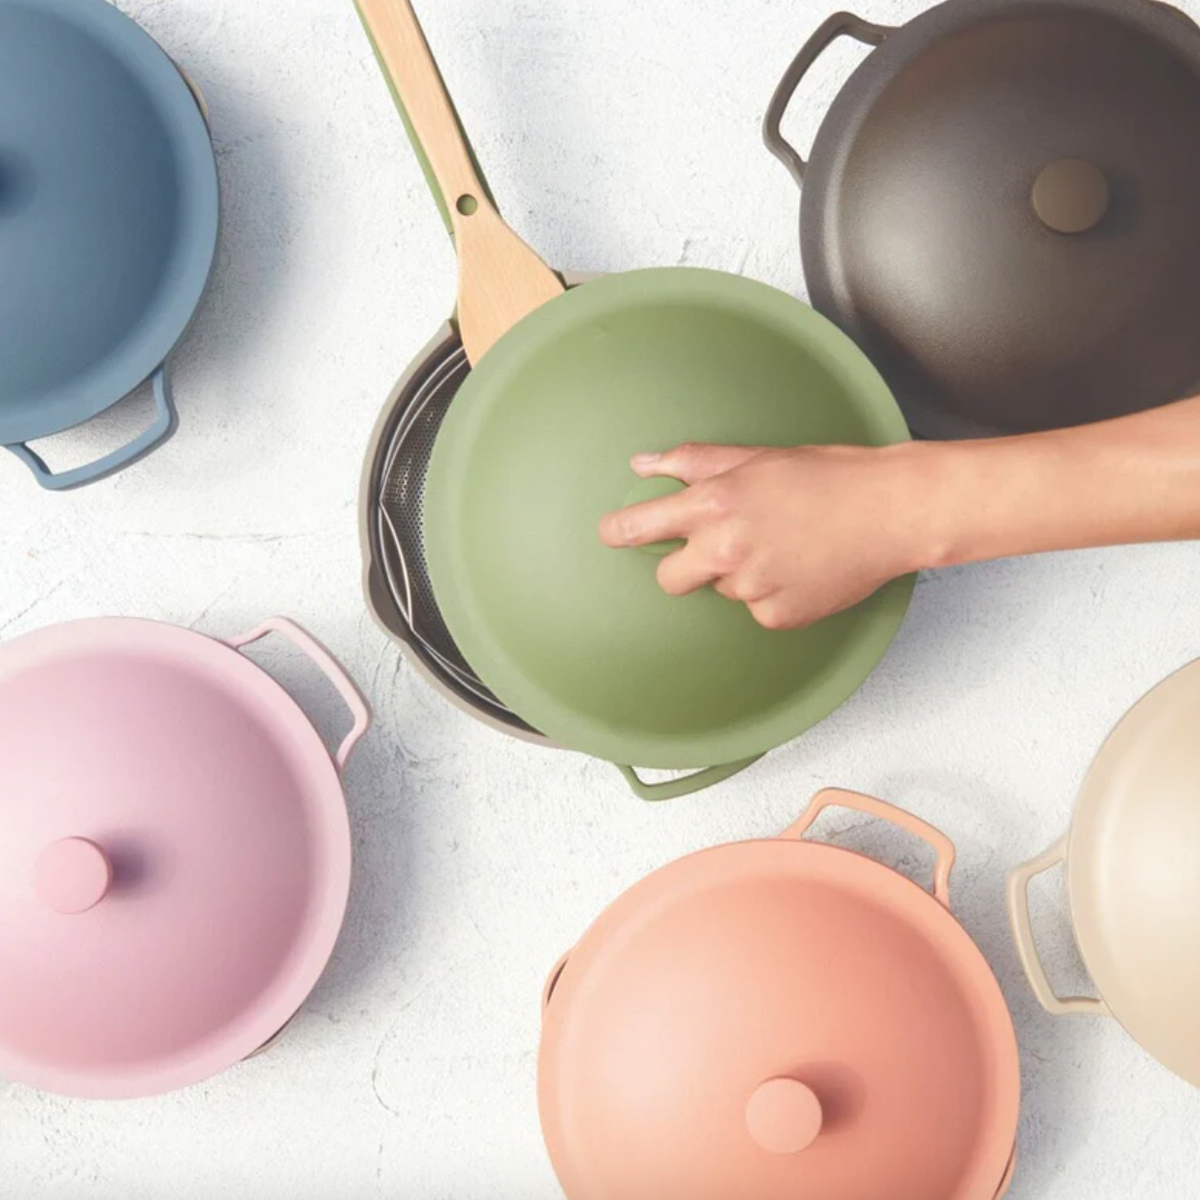 Our Place Spring Sale: Save on the Always Pan 2.0 and more